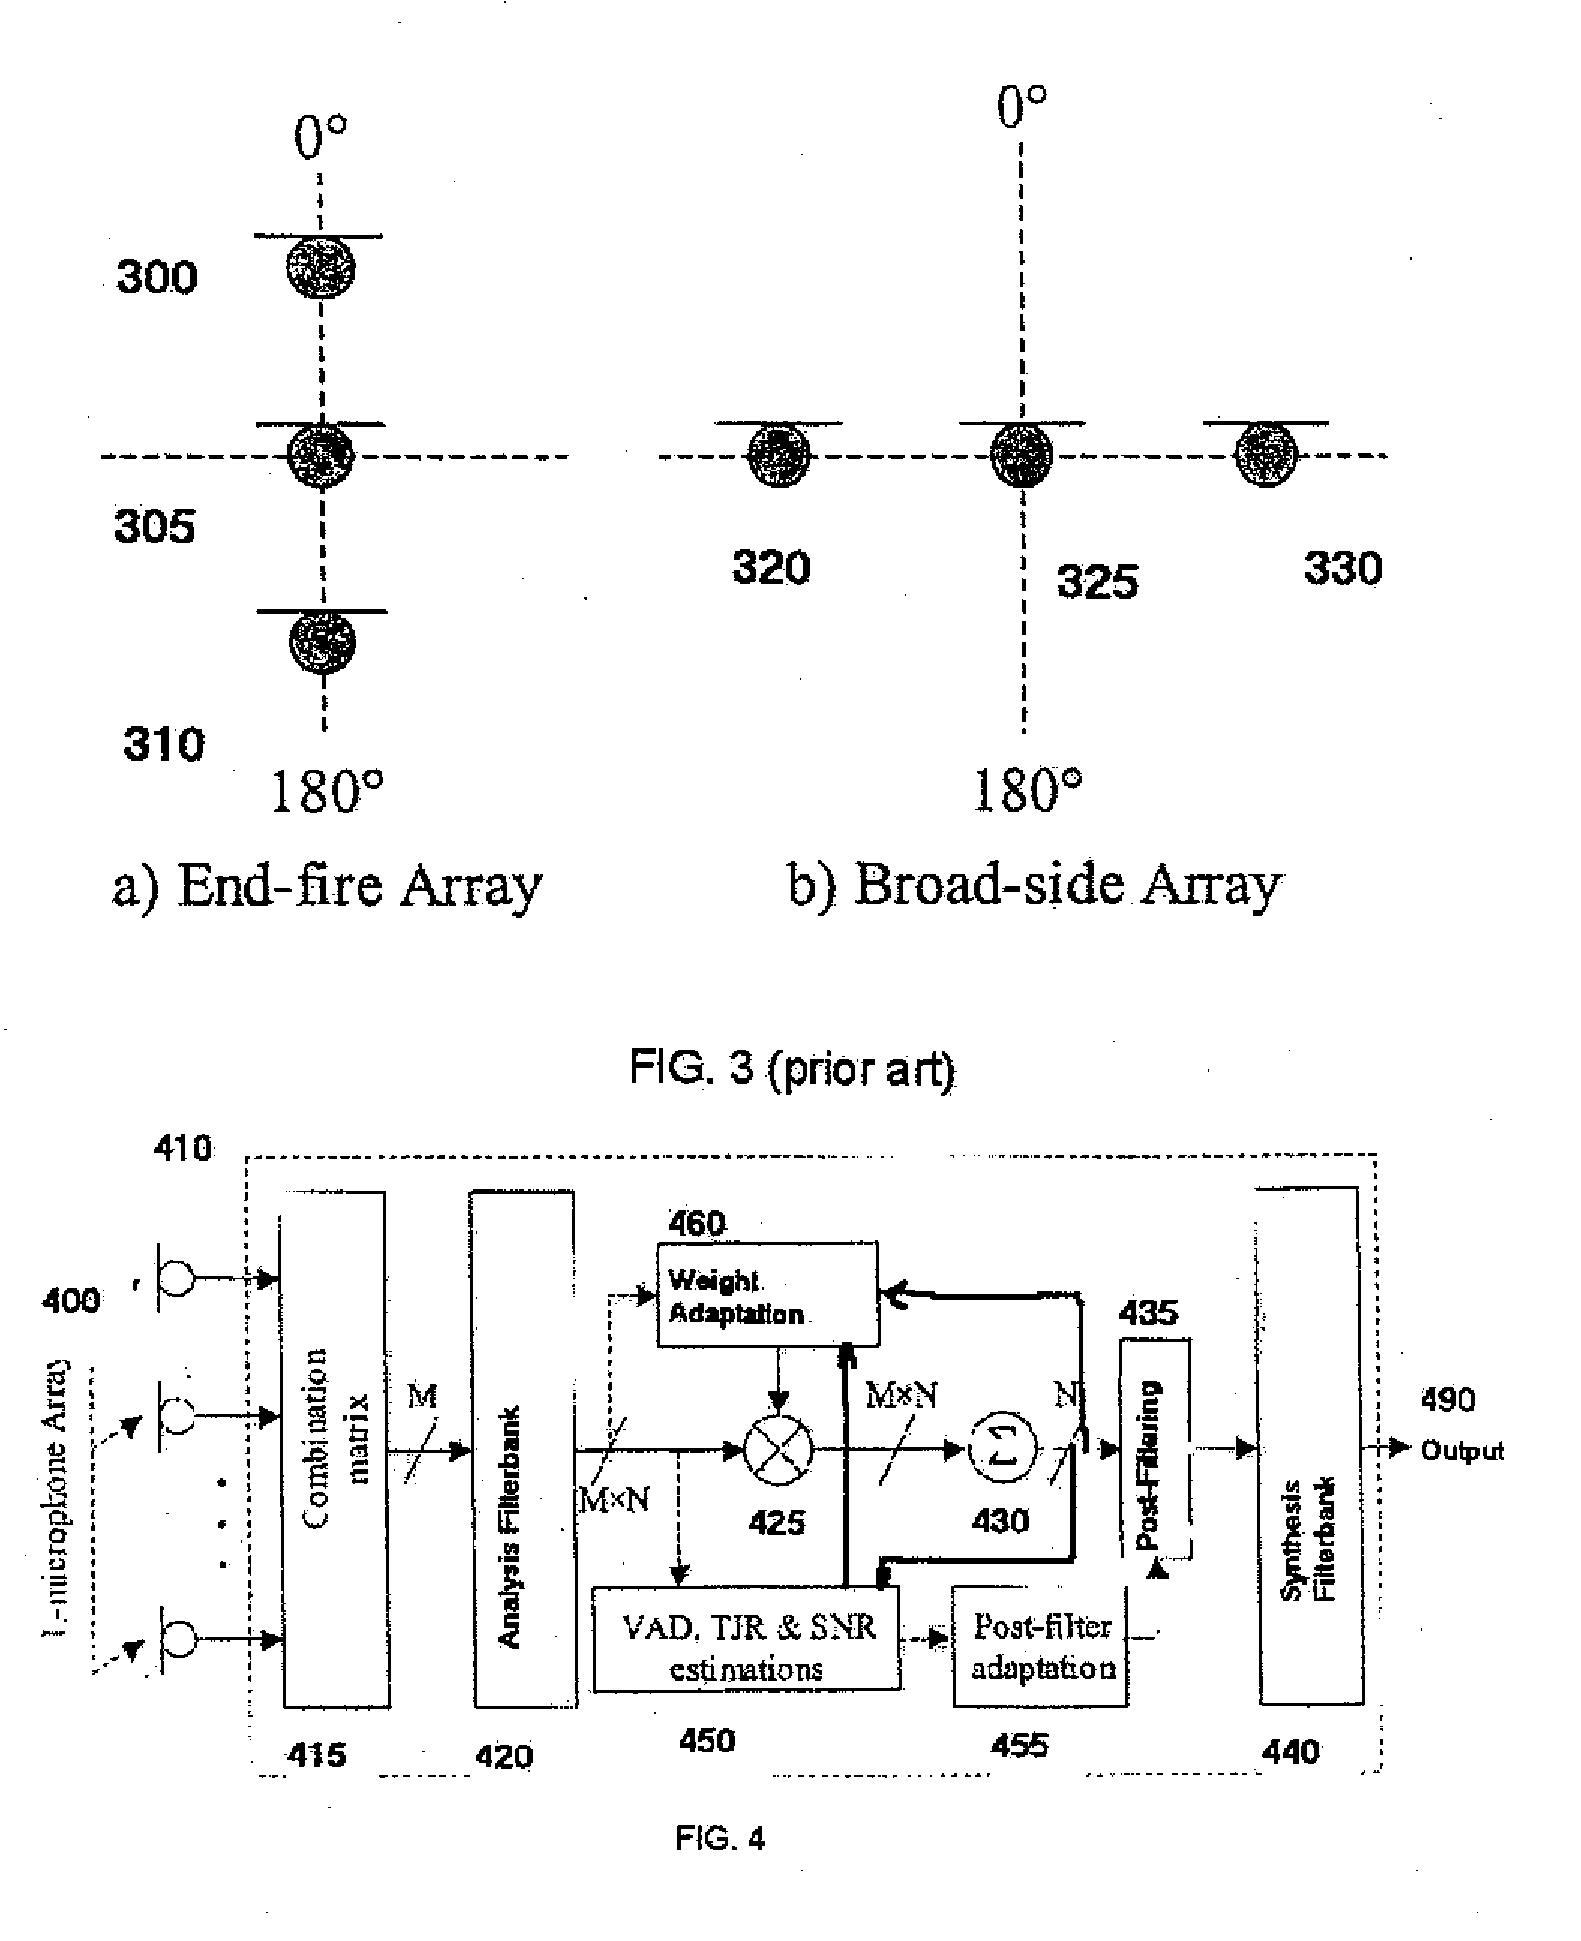 Directional audio signal processing using an oversampled filterbank